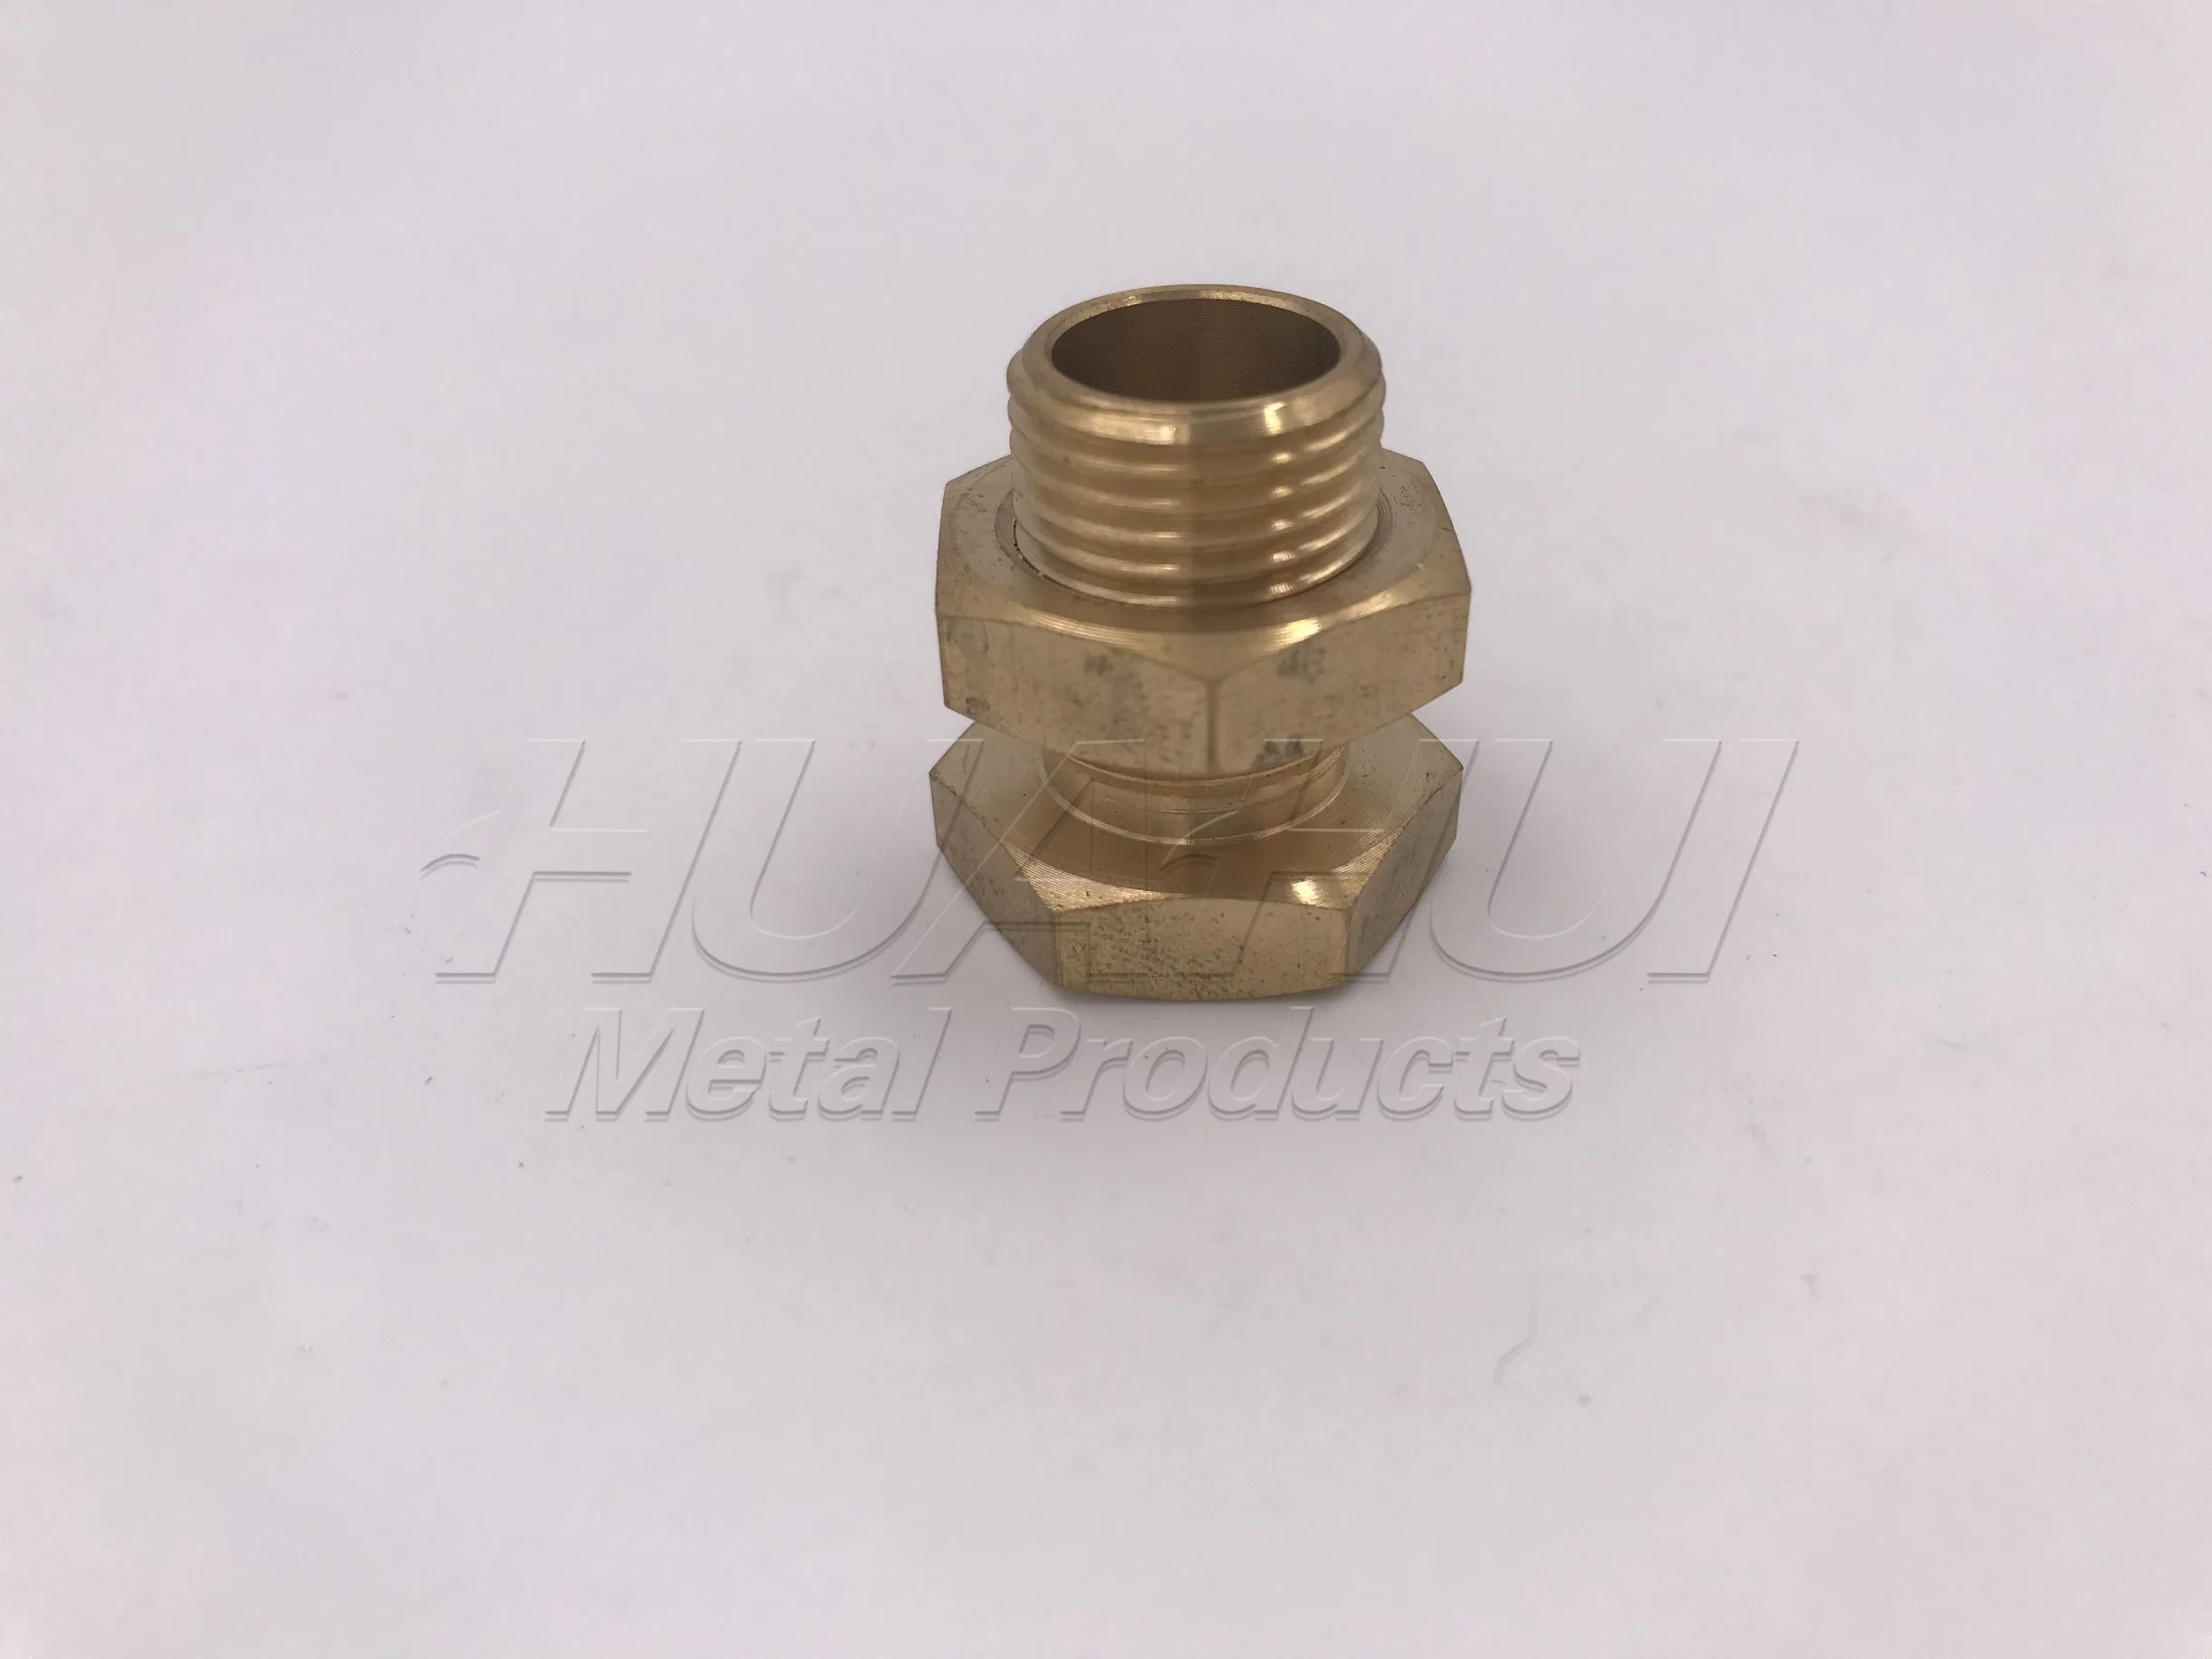 Brass Gas / Electric Heating Furnace Control Valve Plumbing Pipe System Heating Facilities Parts Valve Copper Fitting